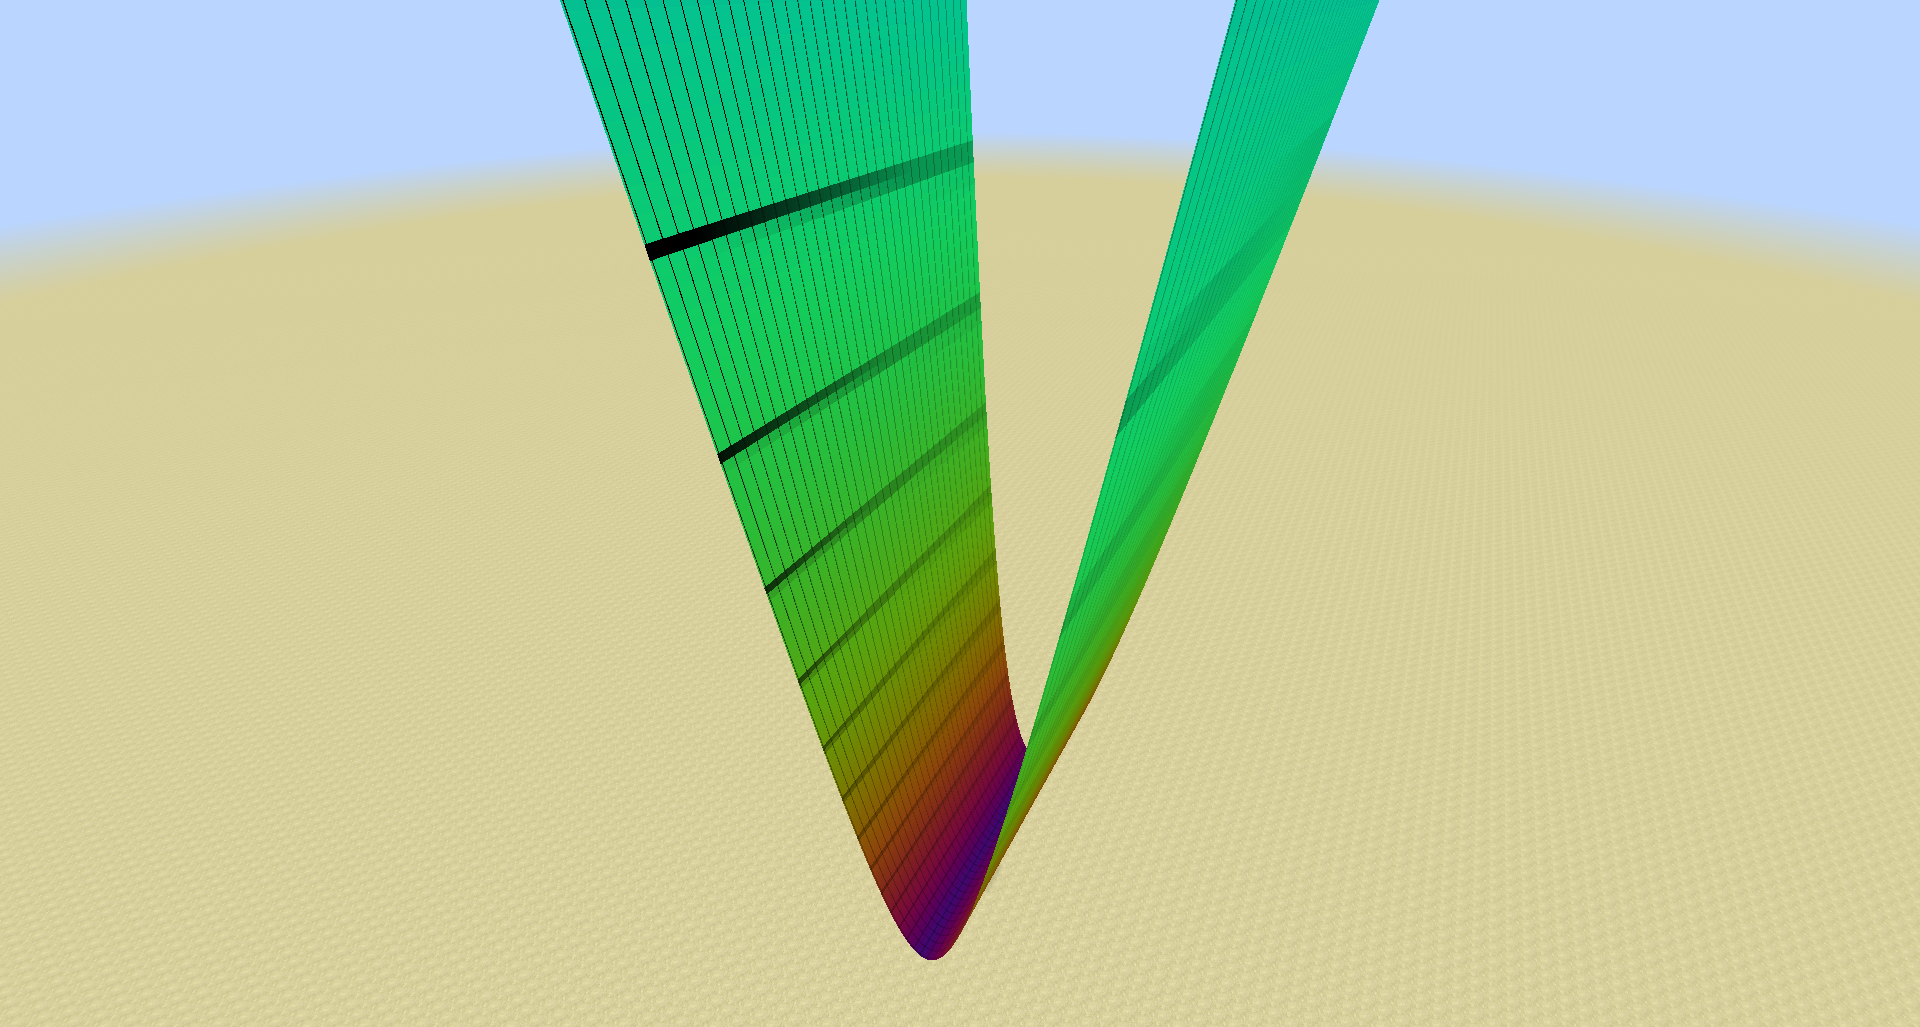 Slope as color, in Cartesian